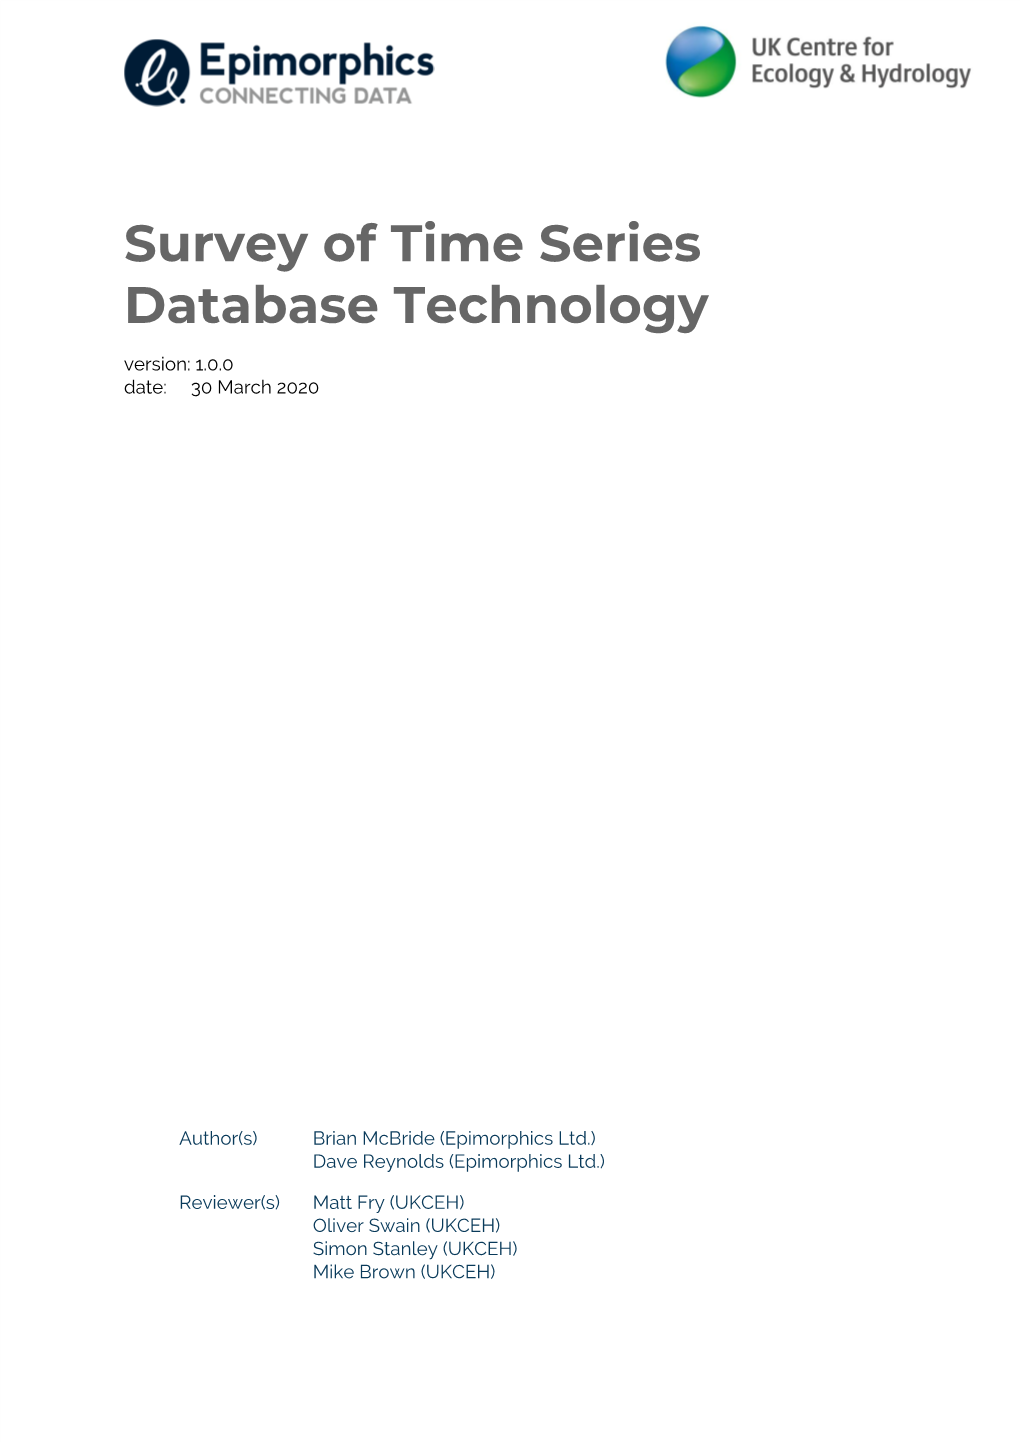 Survey of Time Series Database Technology Version: 1.0.0 Date: 30 March 2020